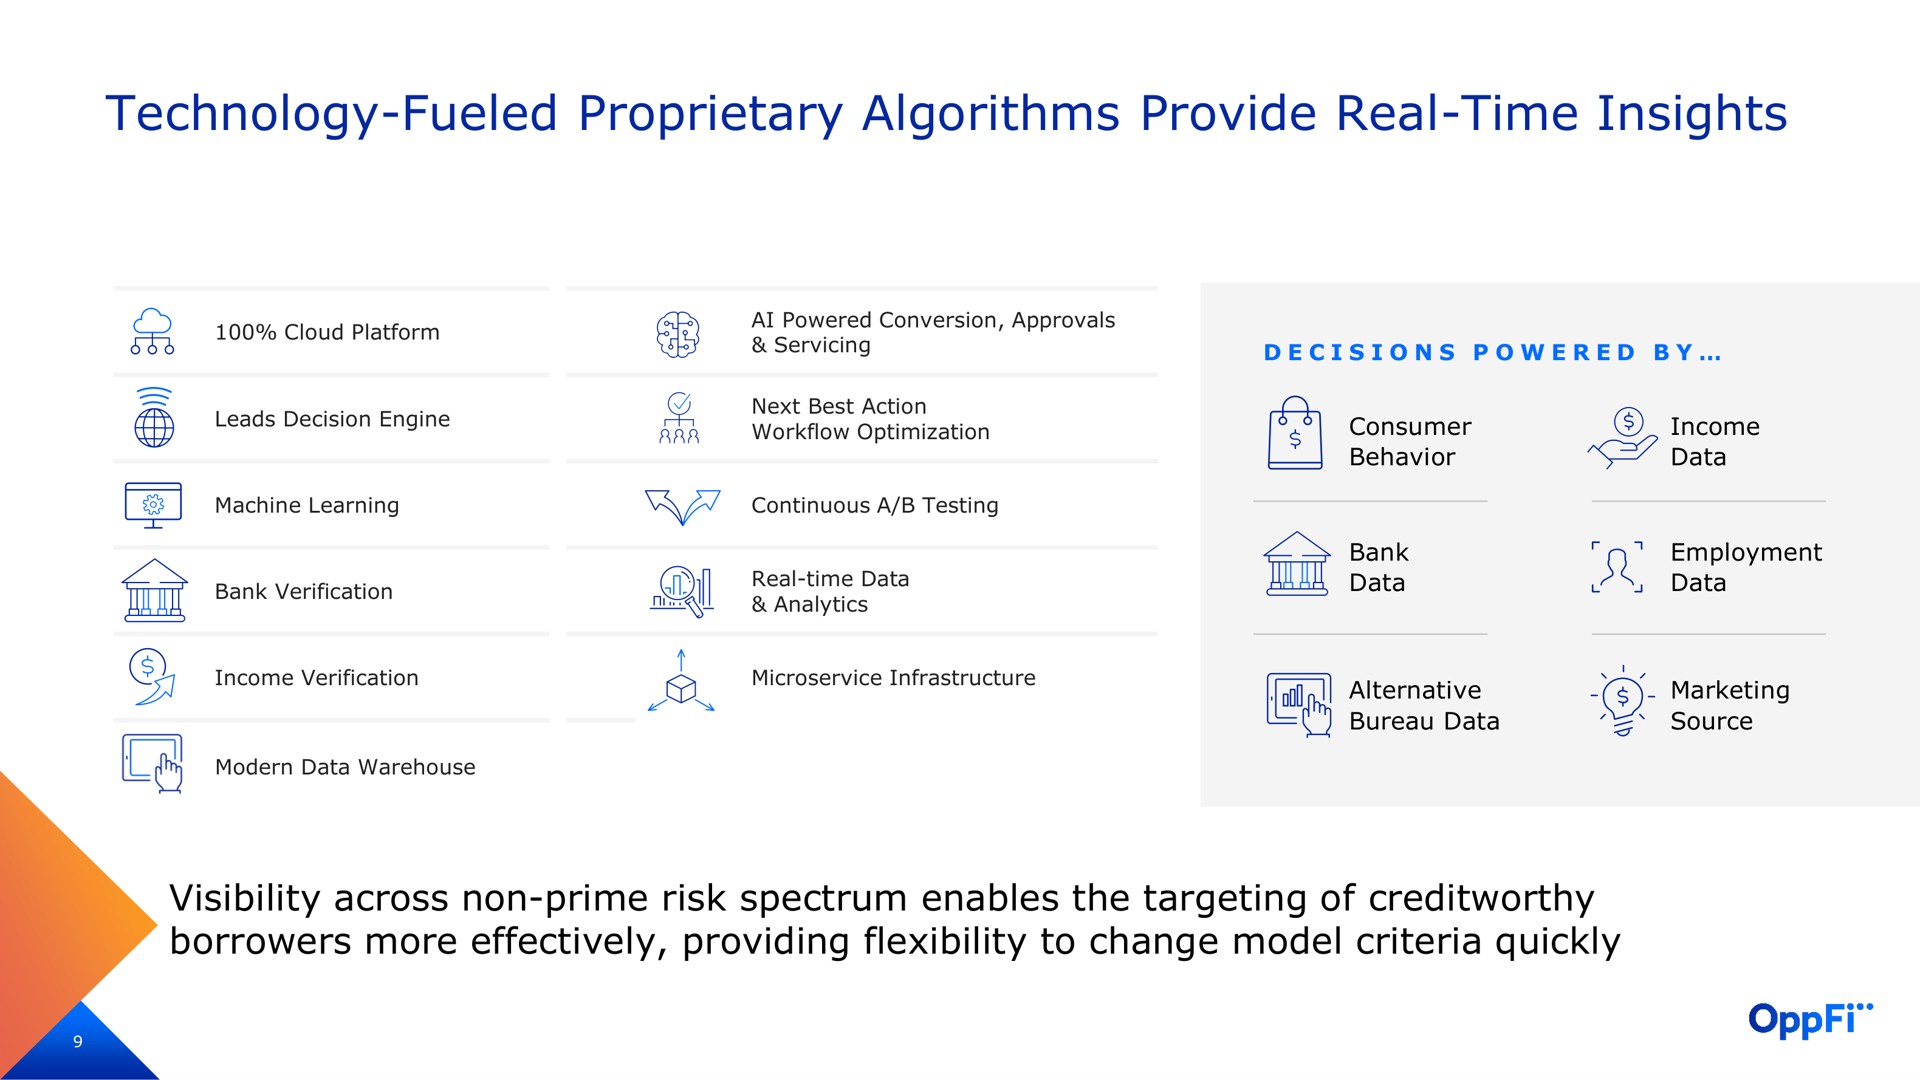 technology fueled proprietary algorithms provide real time insights visibility across non prime risk spectrum enables the targeting of borrowers more effectively providing flexibility to change model criteria quickly machine learning continuous a testing behavior data opt alternative marketing modern data warehouse | OppFi